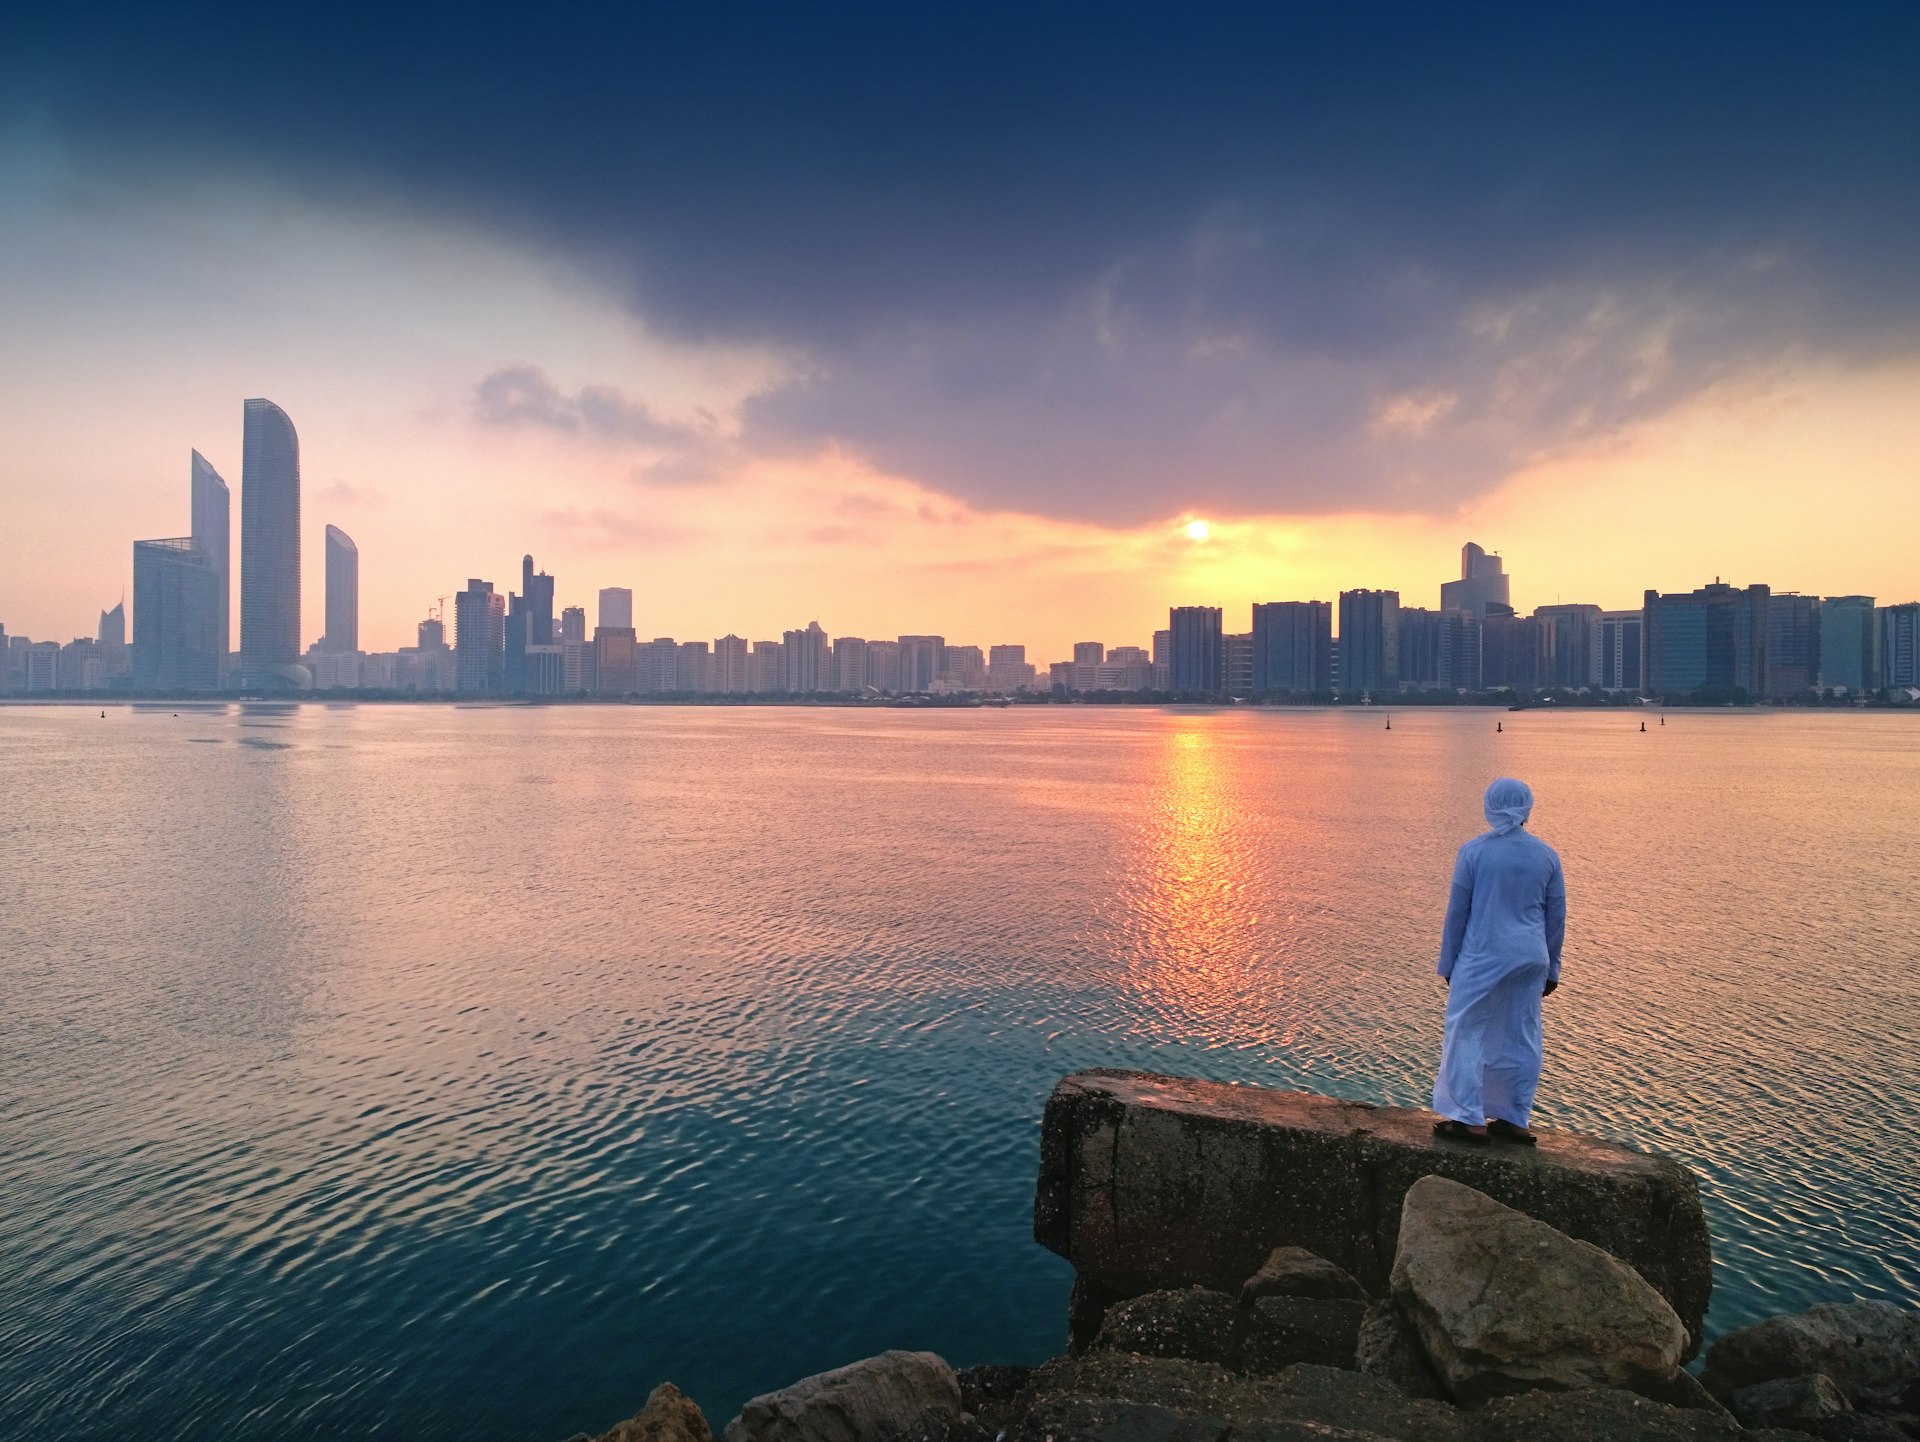 A person stands on a shoreline looking out towards the skyscraper's of Abu Dhabi's skyline